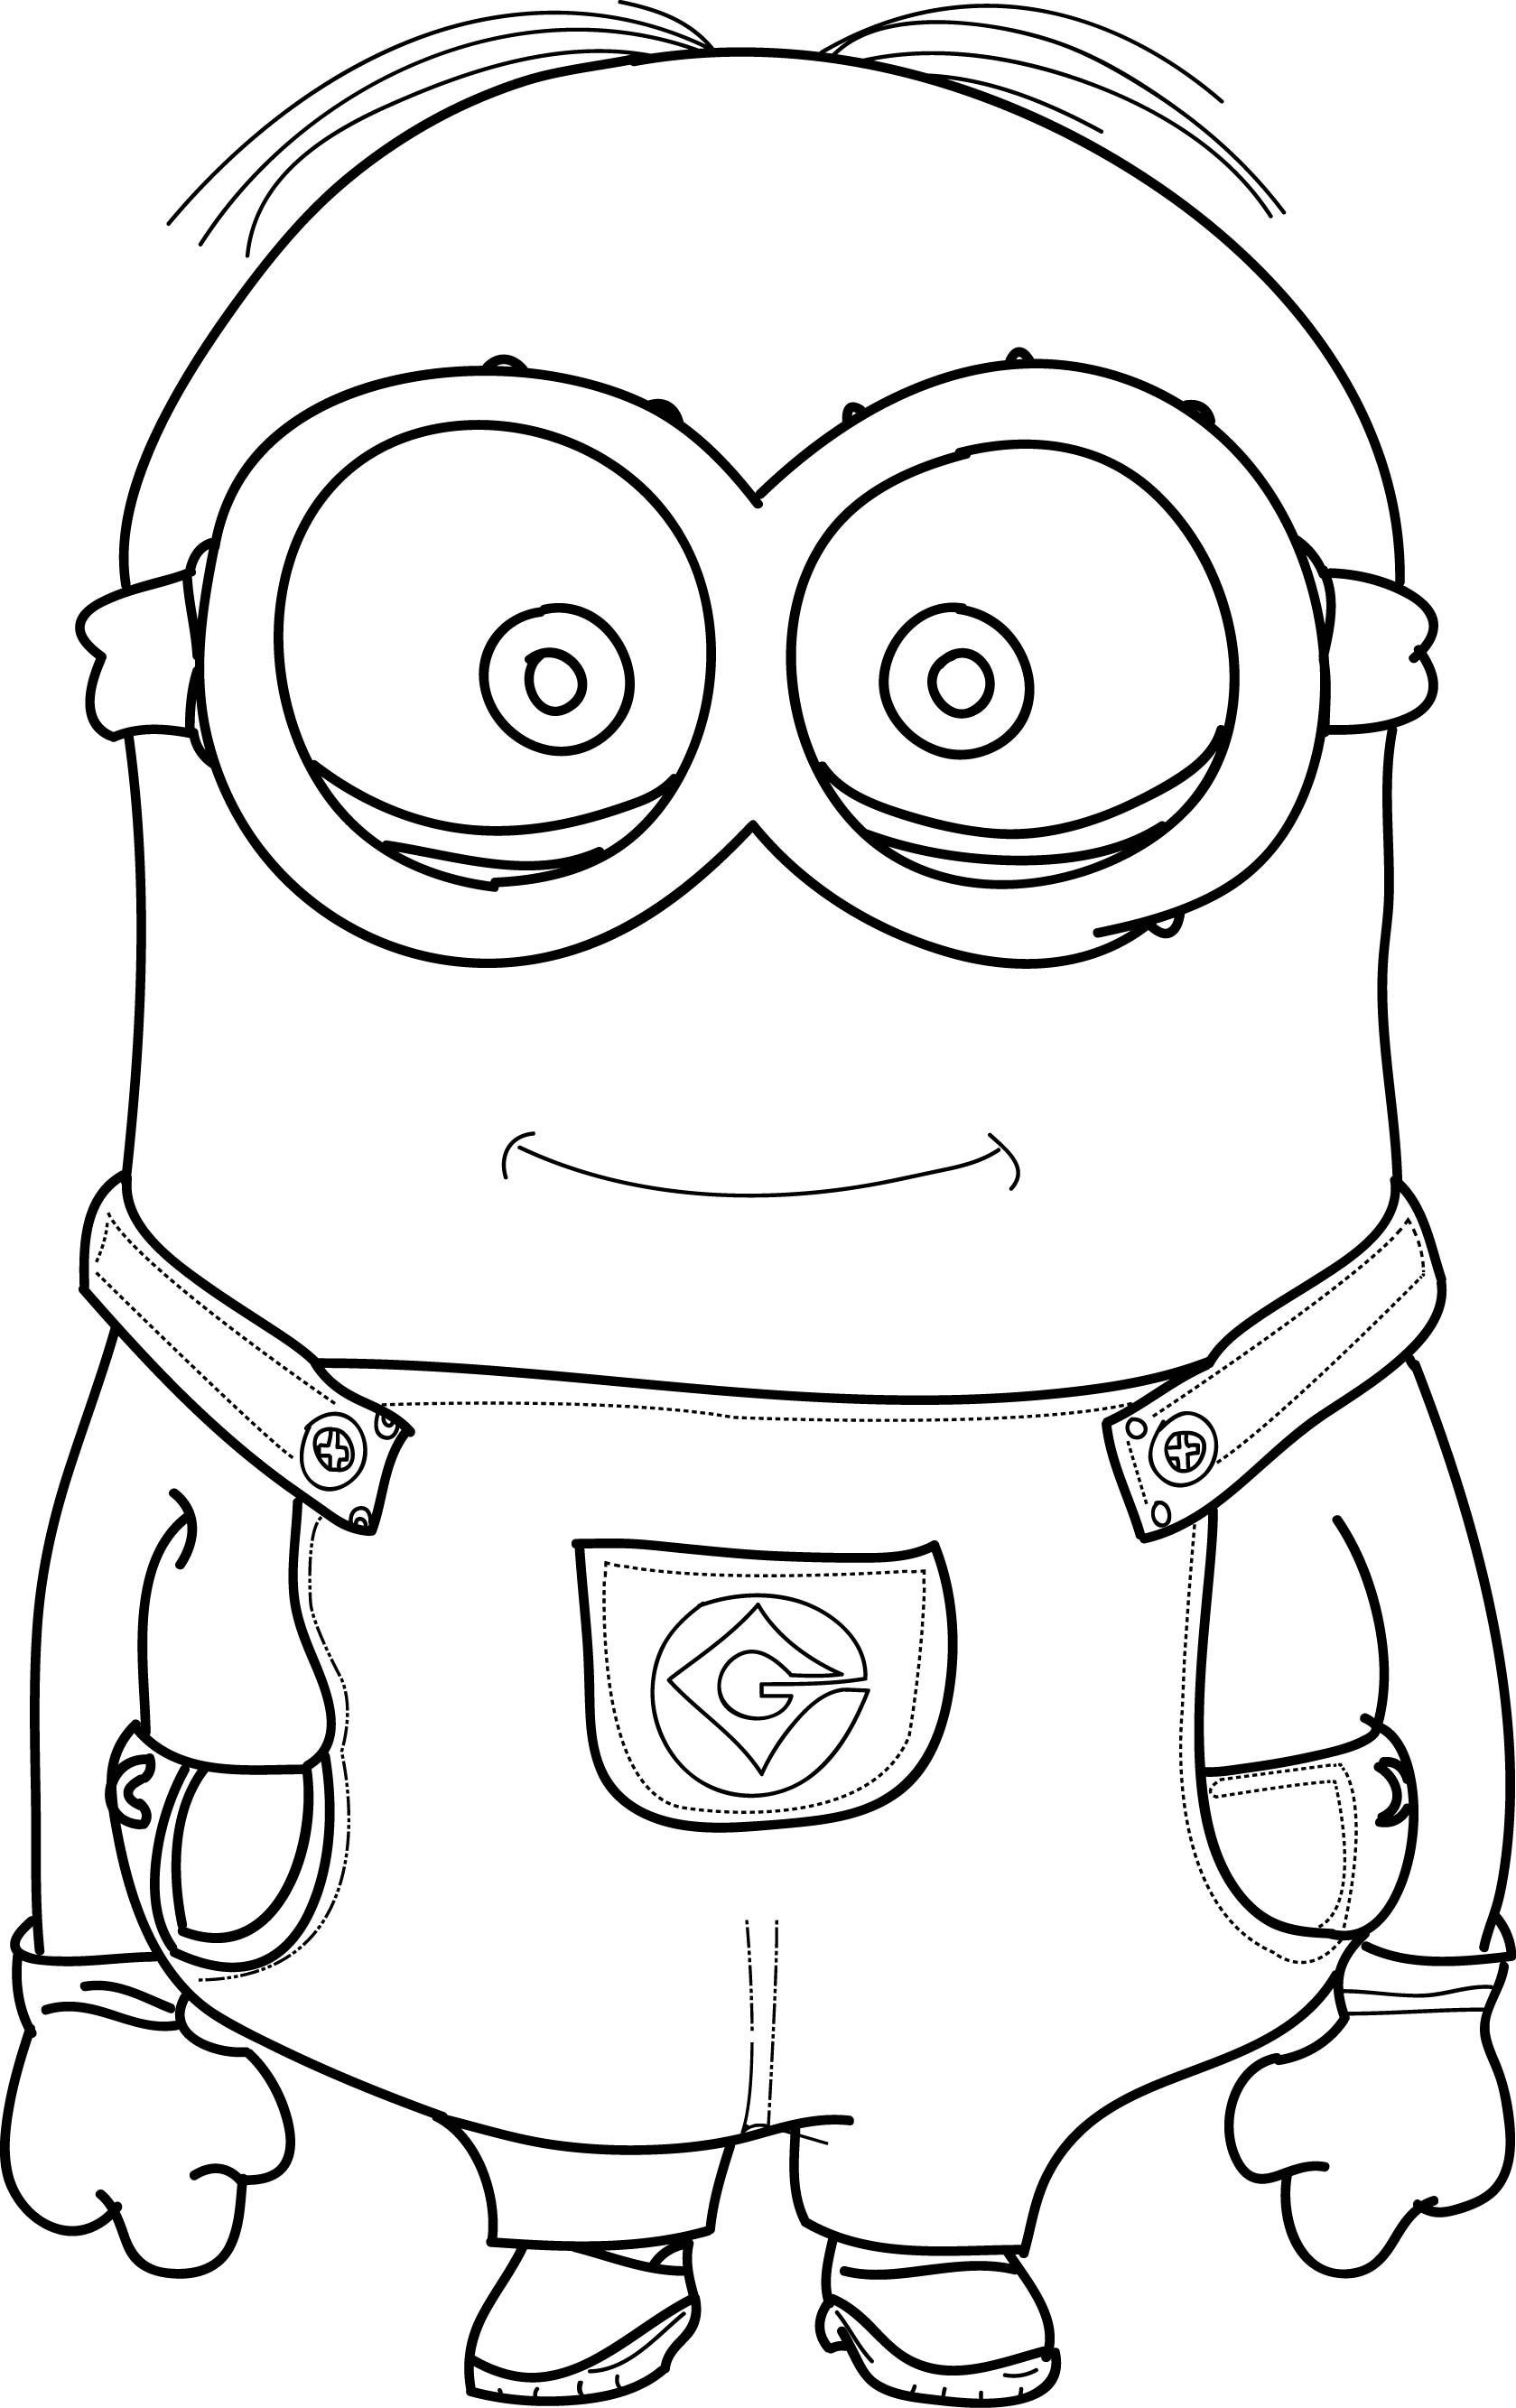 Cool Coloring Pages For Boys
 Minions Coloring Pages wecoloringpage